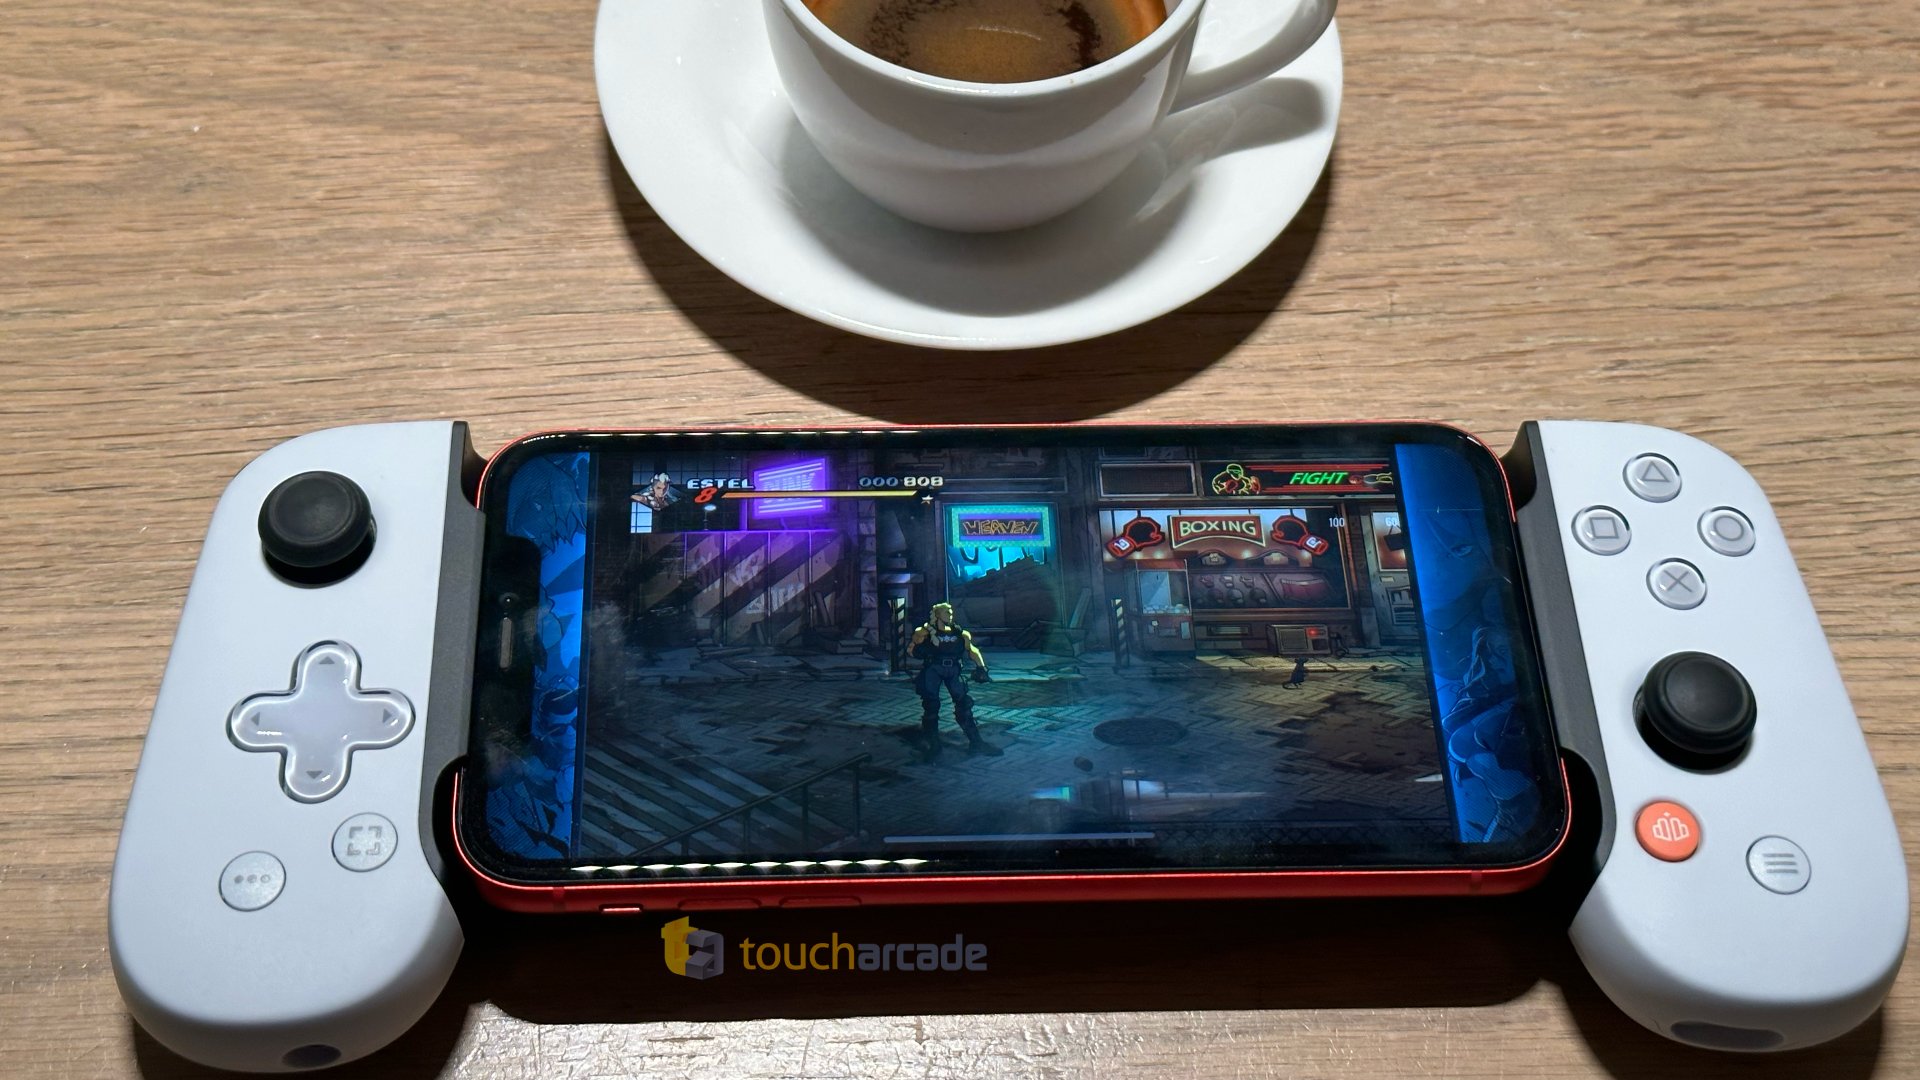 Intuición maceta Ridículo The Best iOS Games With Controller Support in 2022 – From Dead Cells to  Genshin Impact and More – TouchArcade